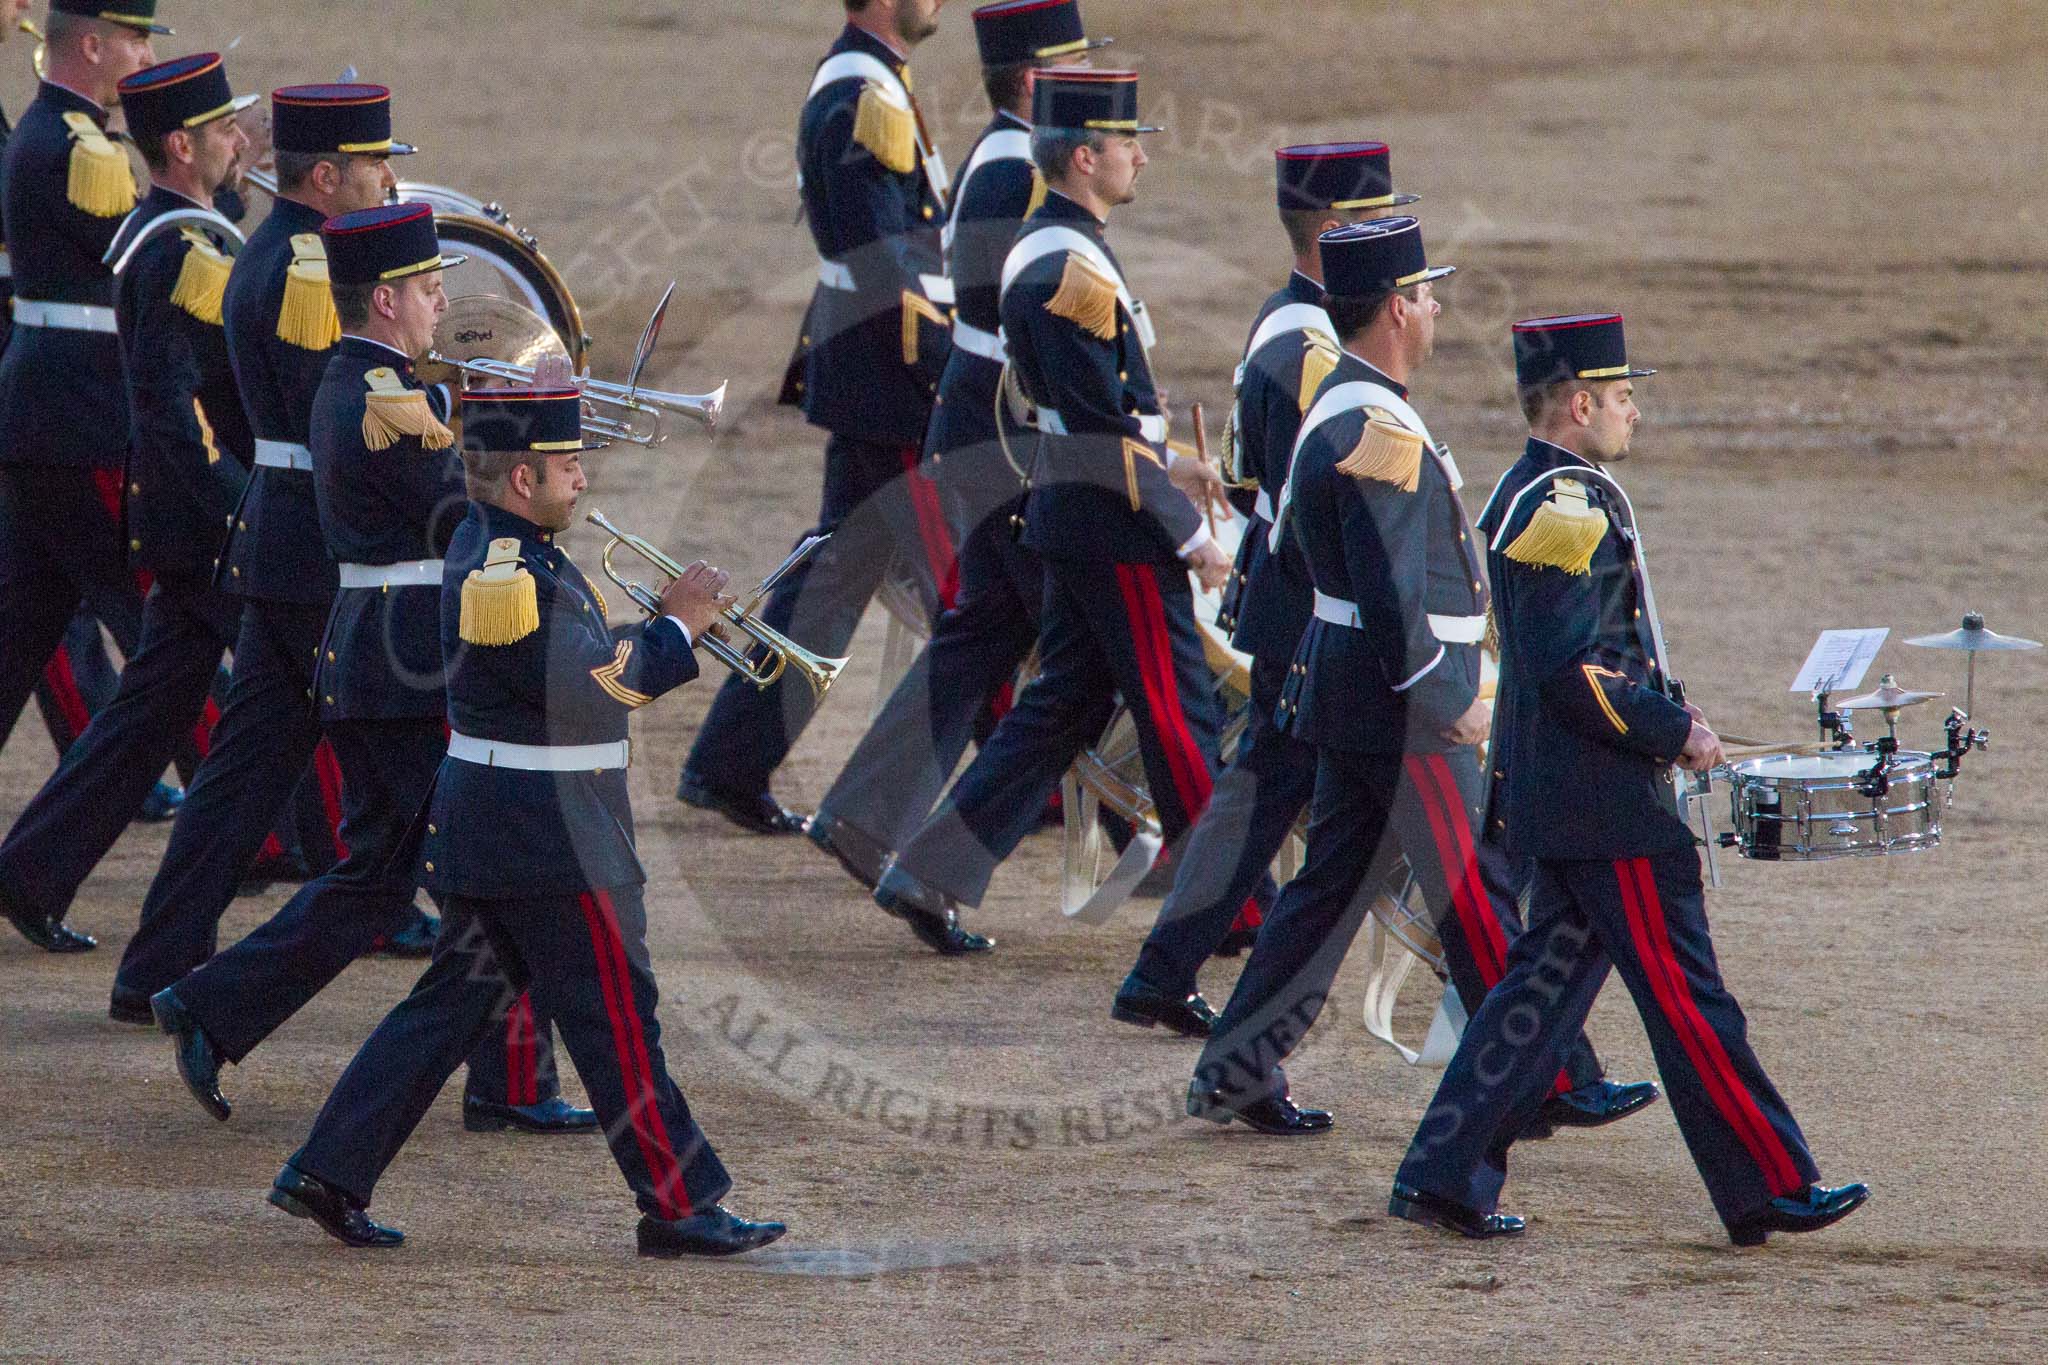 Beating Retreat 2014.
Horse Guards Parade, Westminster,
London SW1A,

United Kingdom,
on 11 June 2014 at 21:19, image #308